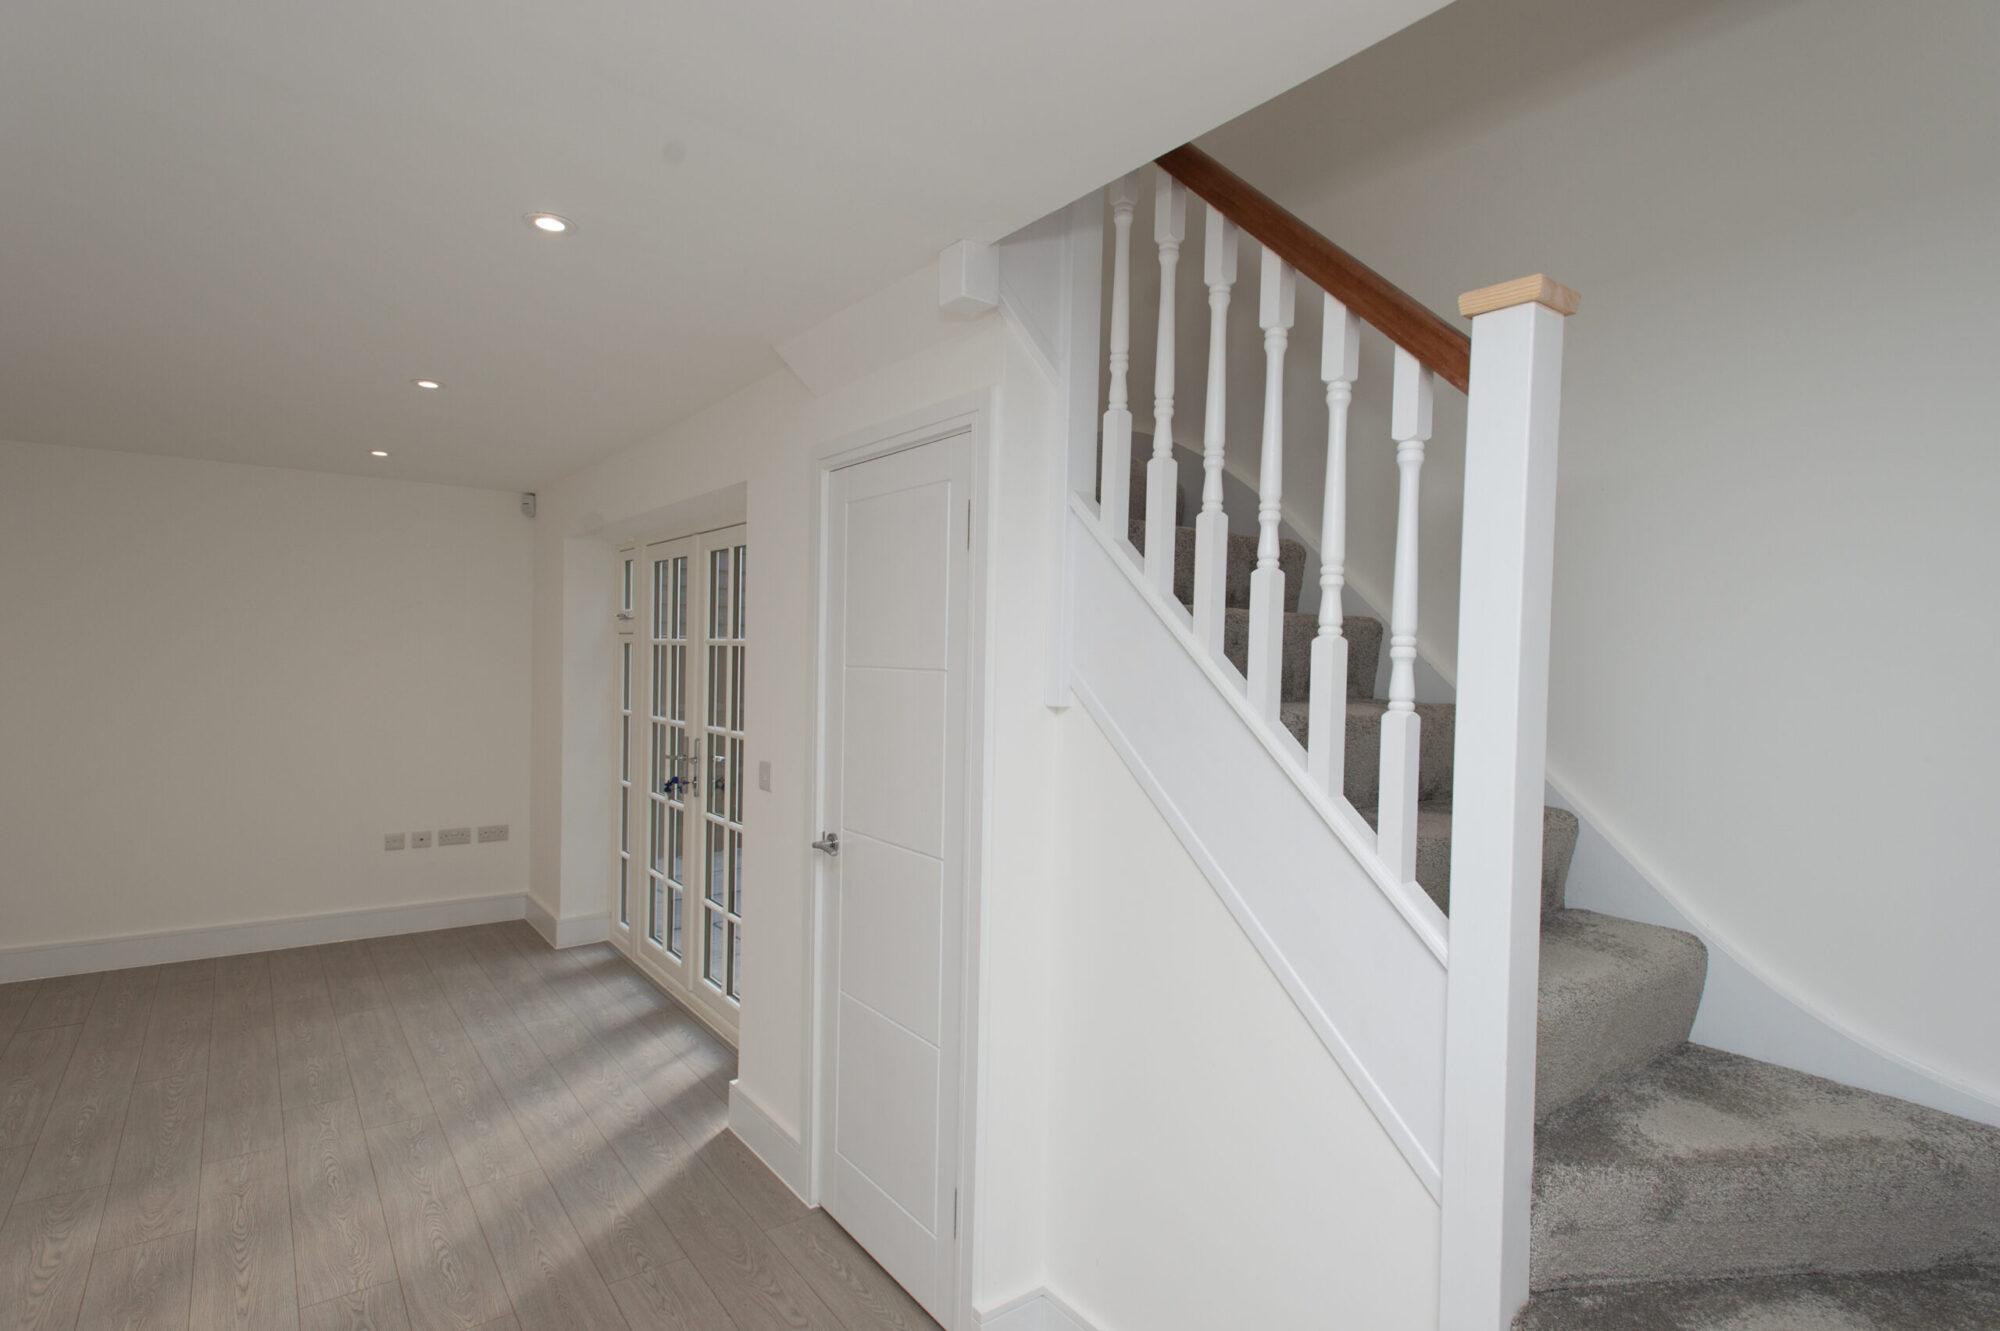 New 2 bedroom detached home finished in one of the best roads in enfield